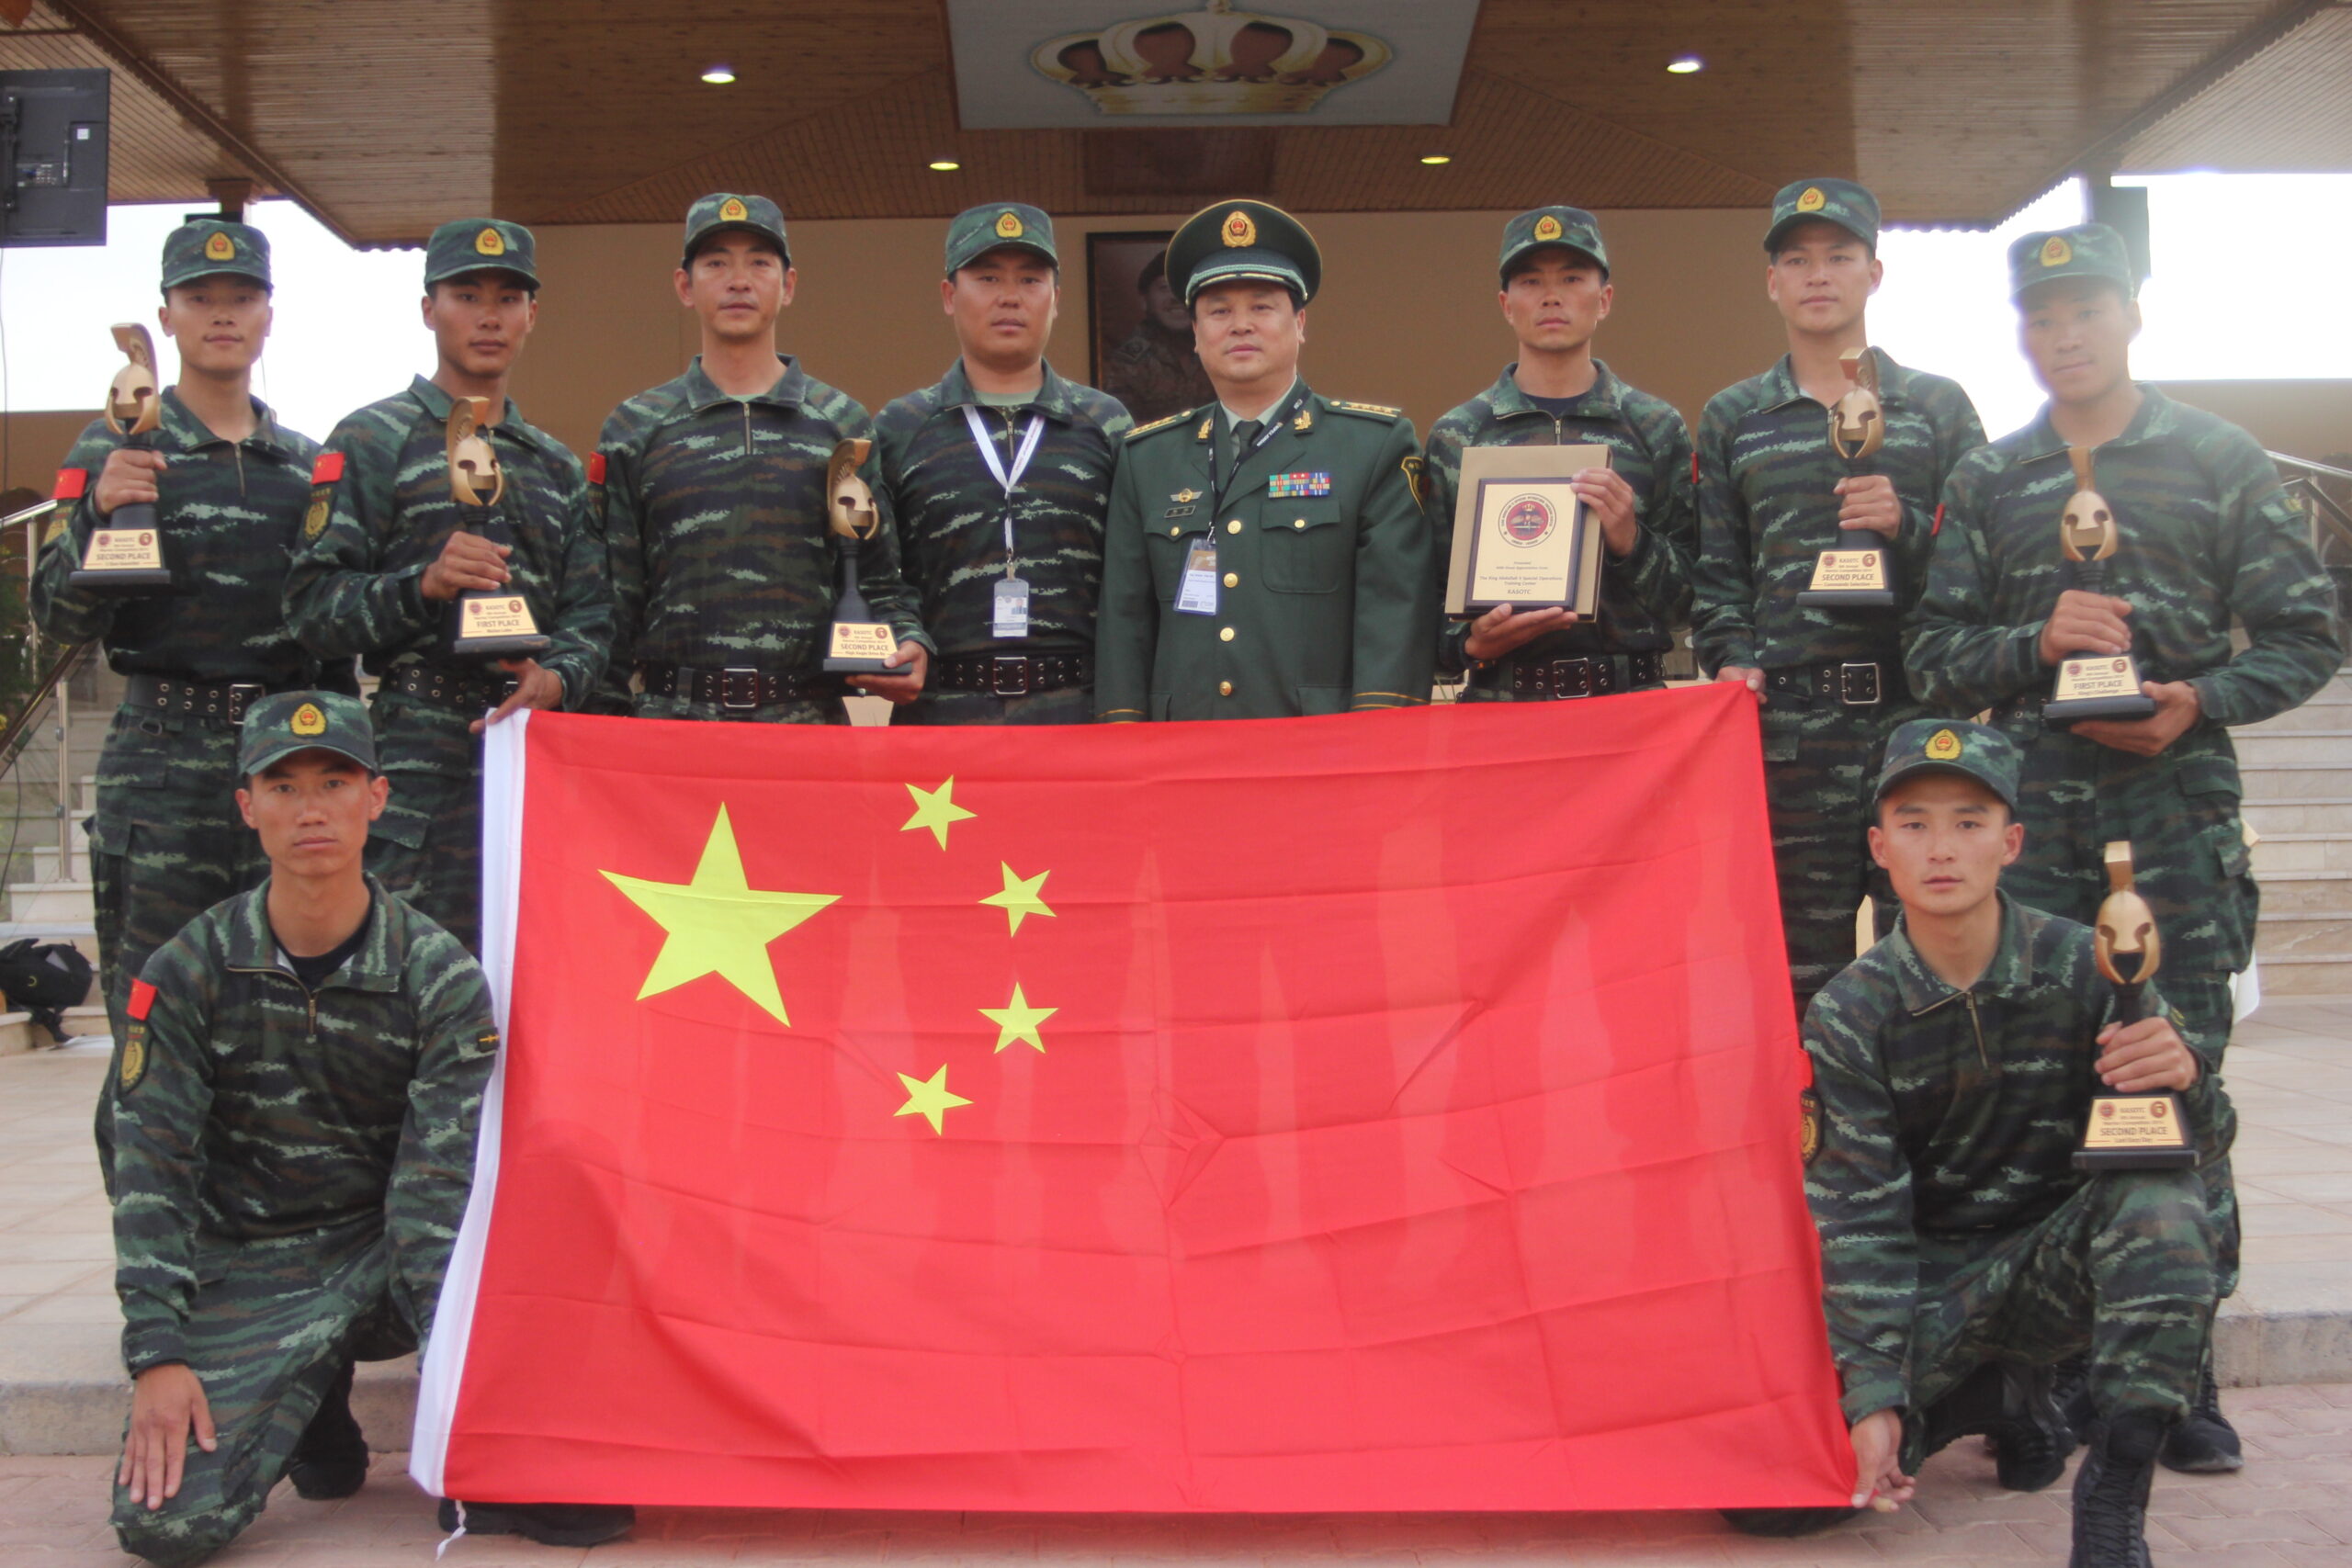 Chinese Special Forces Take 1st, 2nd And 4th Place At ‘Olympics’ For Elite Warriors